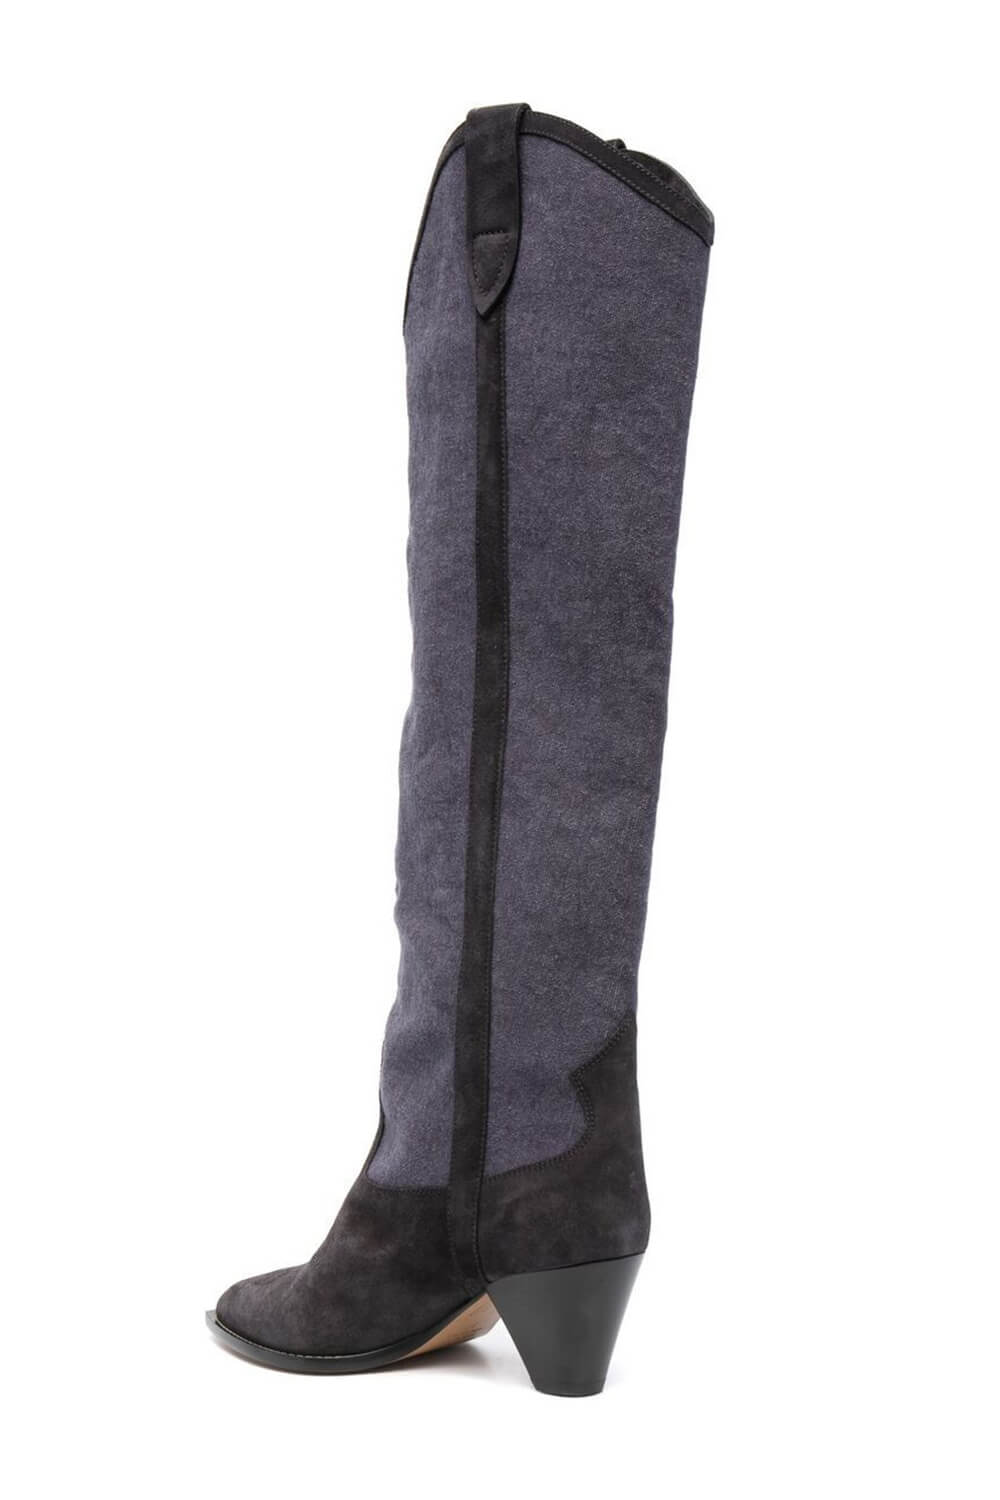 Suede Two-Tone Pointed Toe Western Cowboy Knee High Boots - Grey